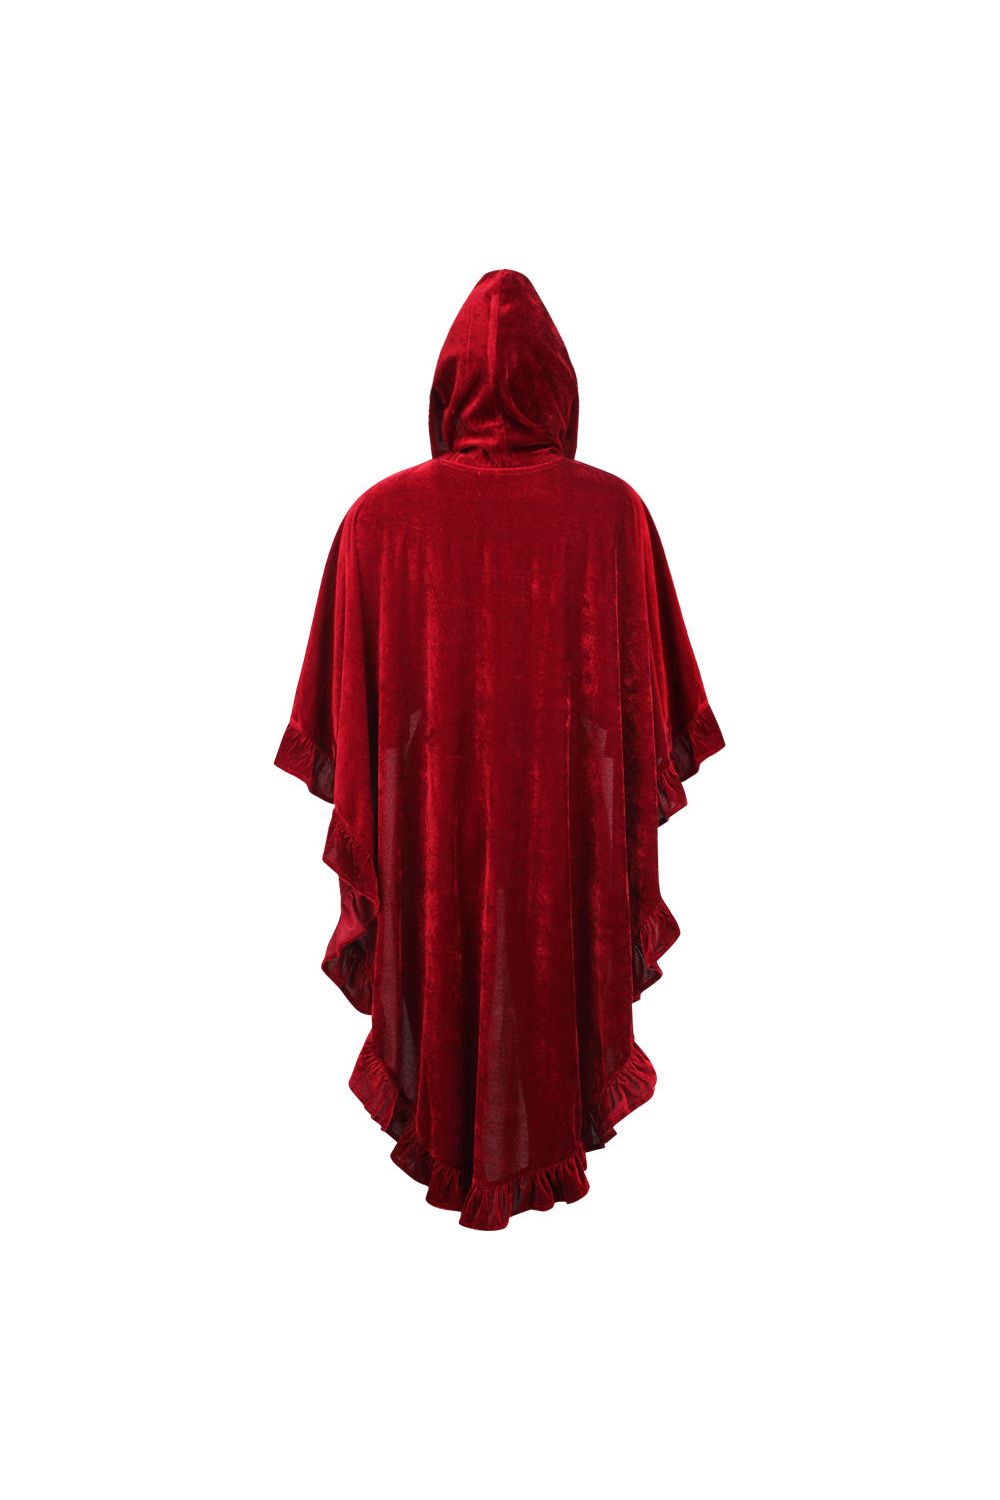 Velvet Hooded Ruffle Cape by Daisy Corsets in 3 Color Choices in One Size